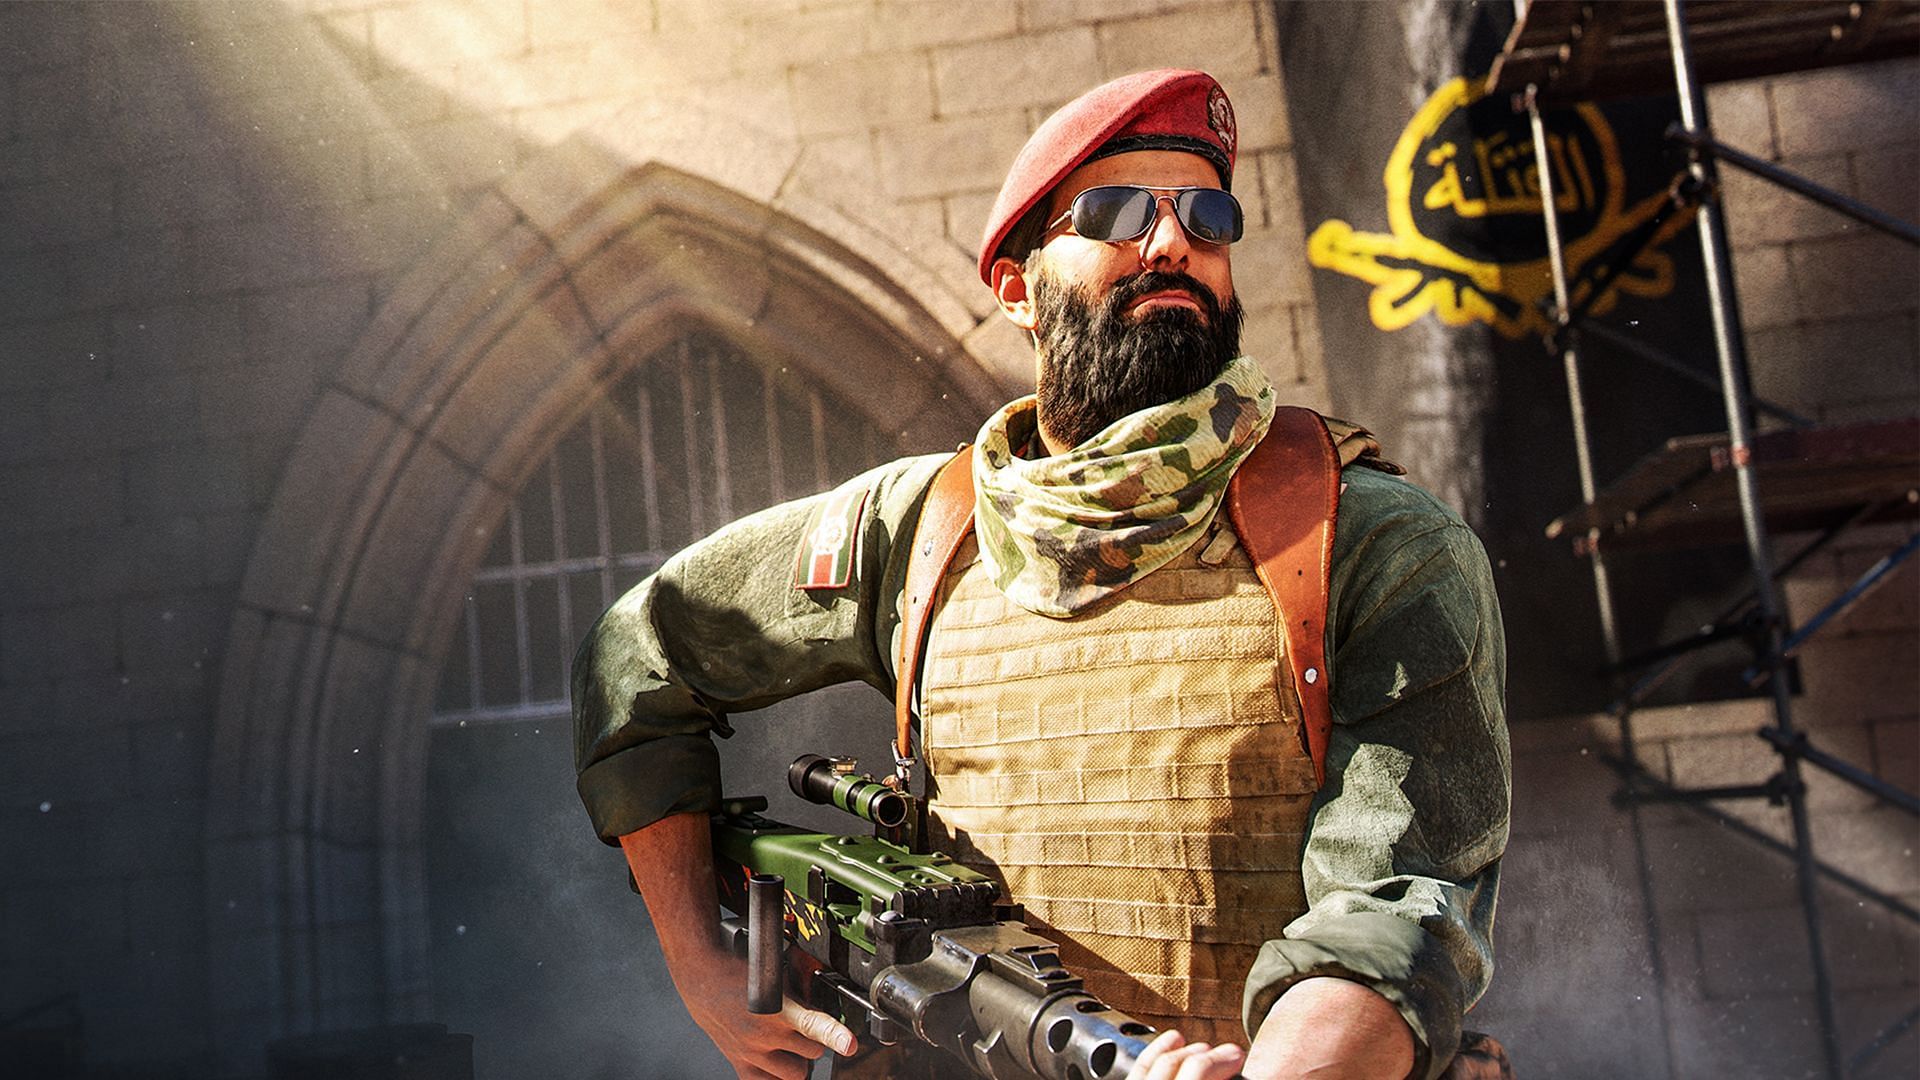 Khaled Al-Asad is a military commander and warlord in the Middle East (Image via Activision)